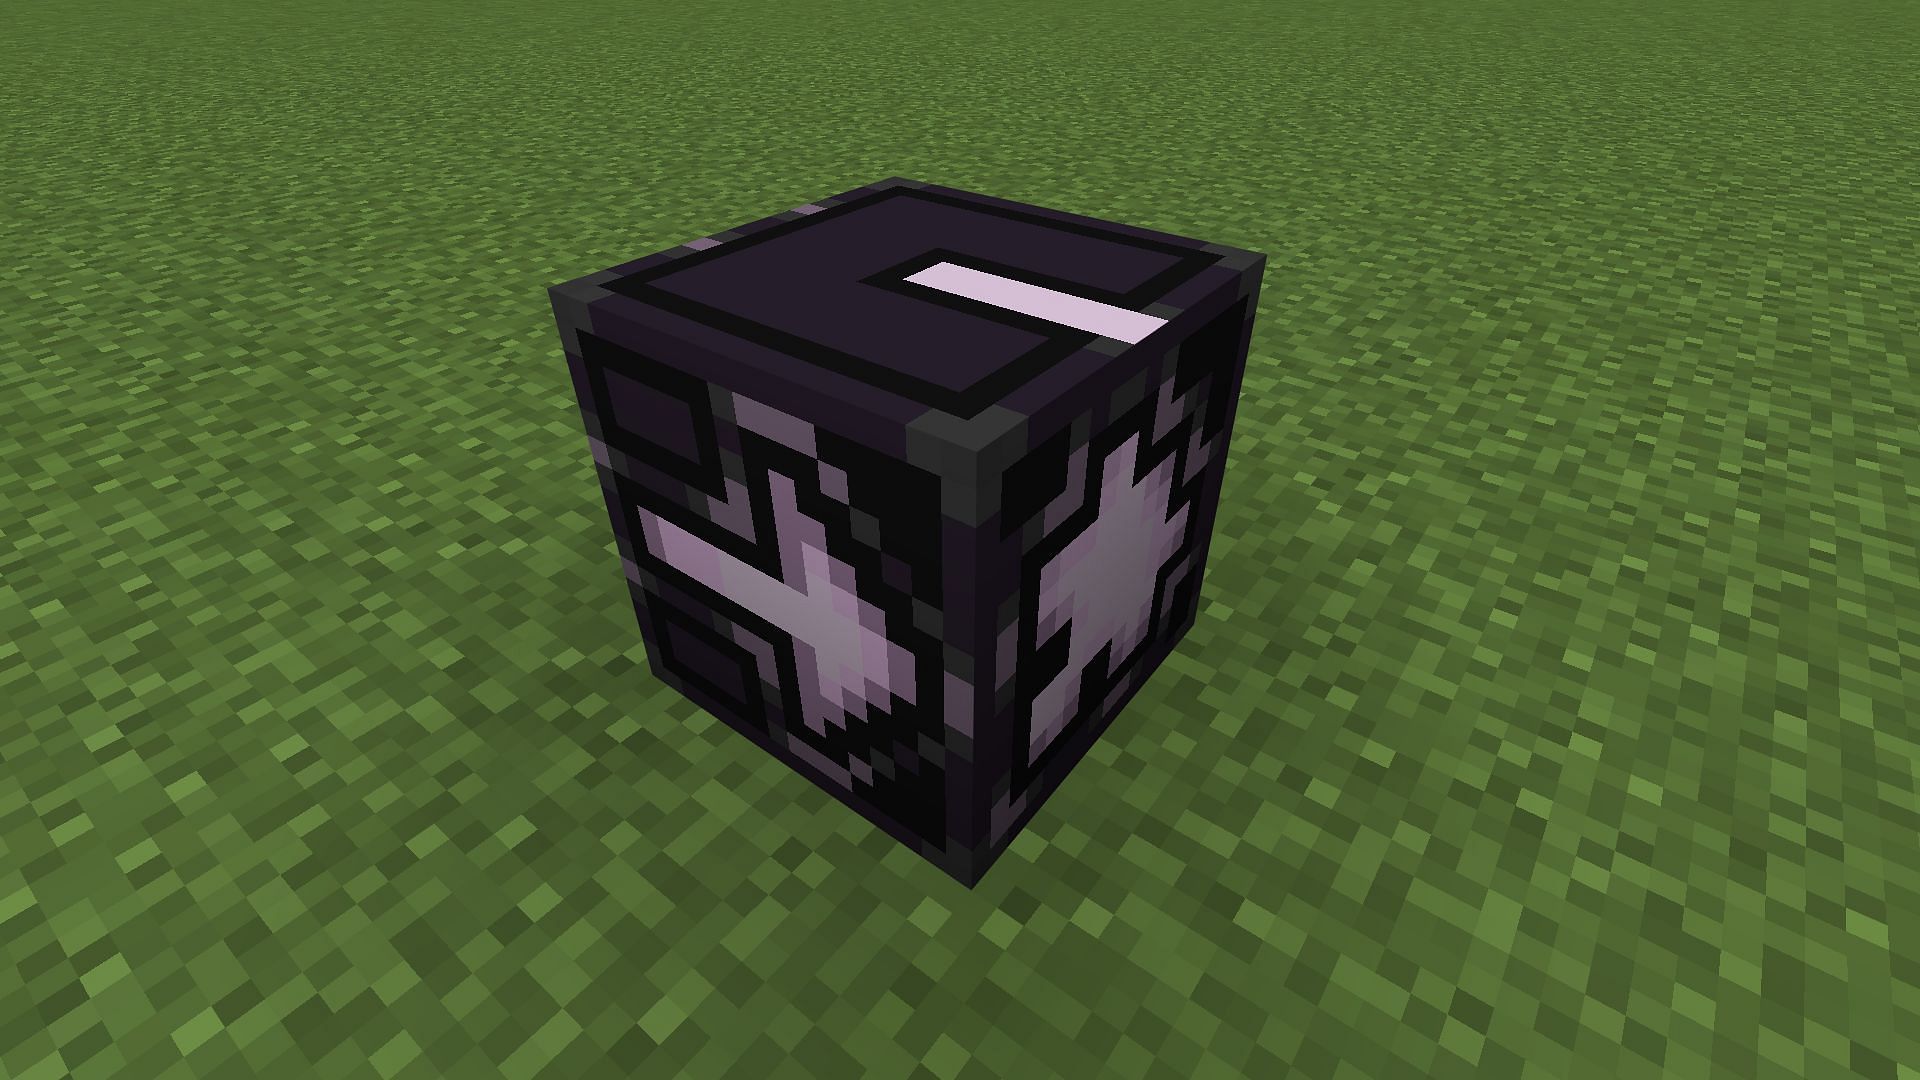 The jigsaw block connects a part of a structure to another in Minecraft (Image via Mojang)